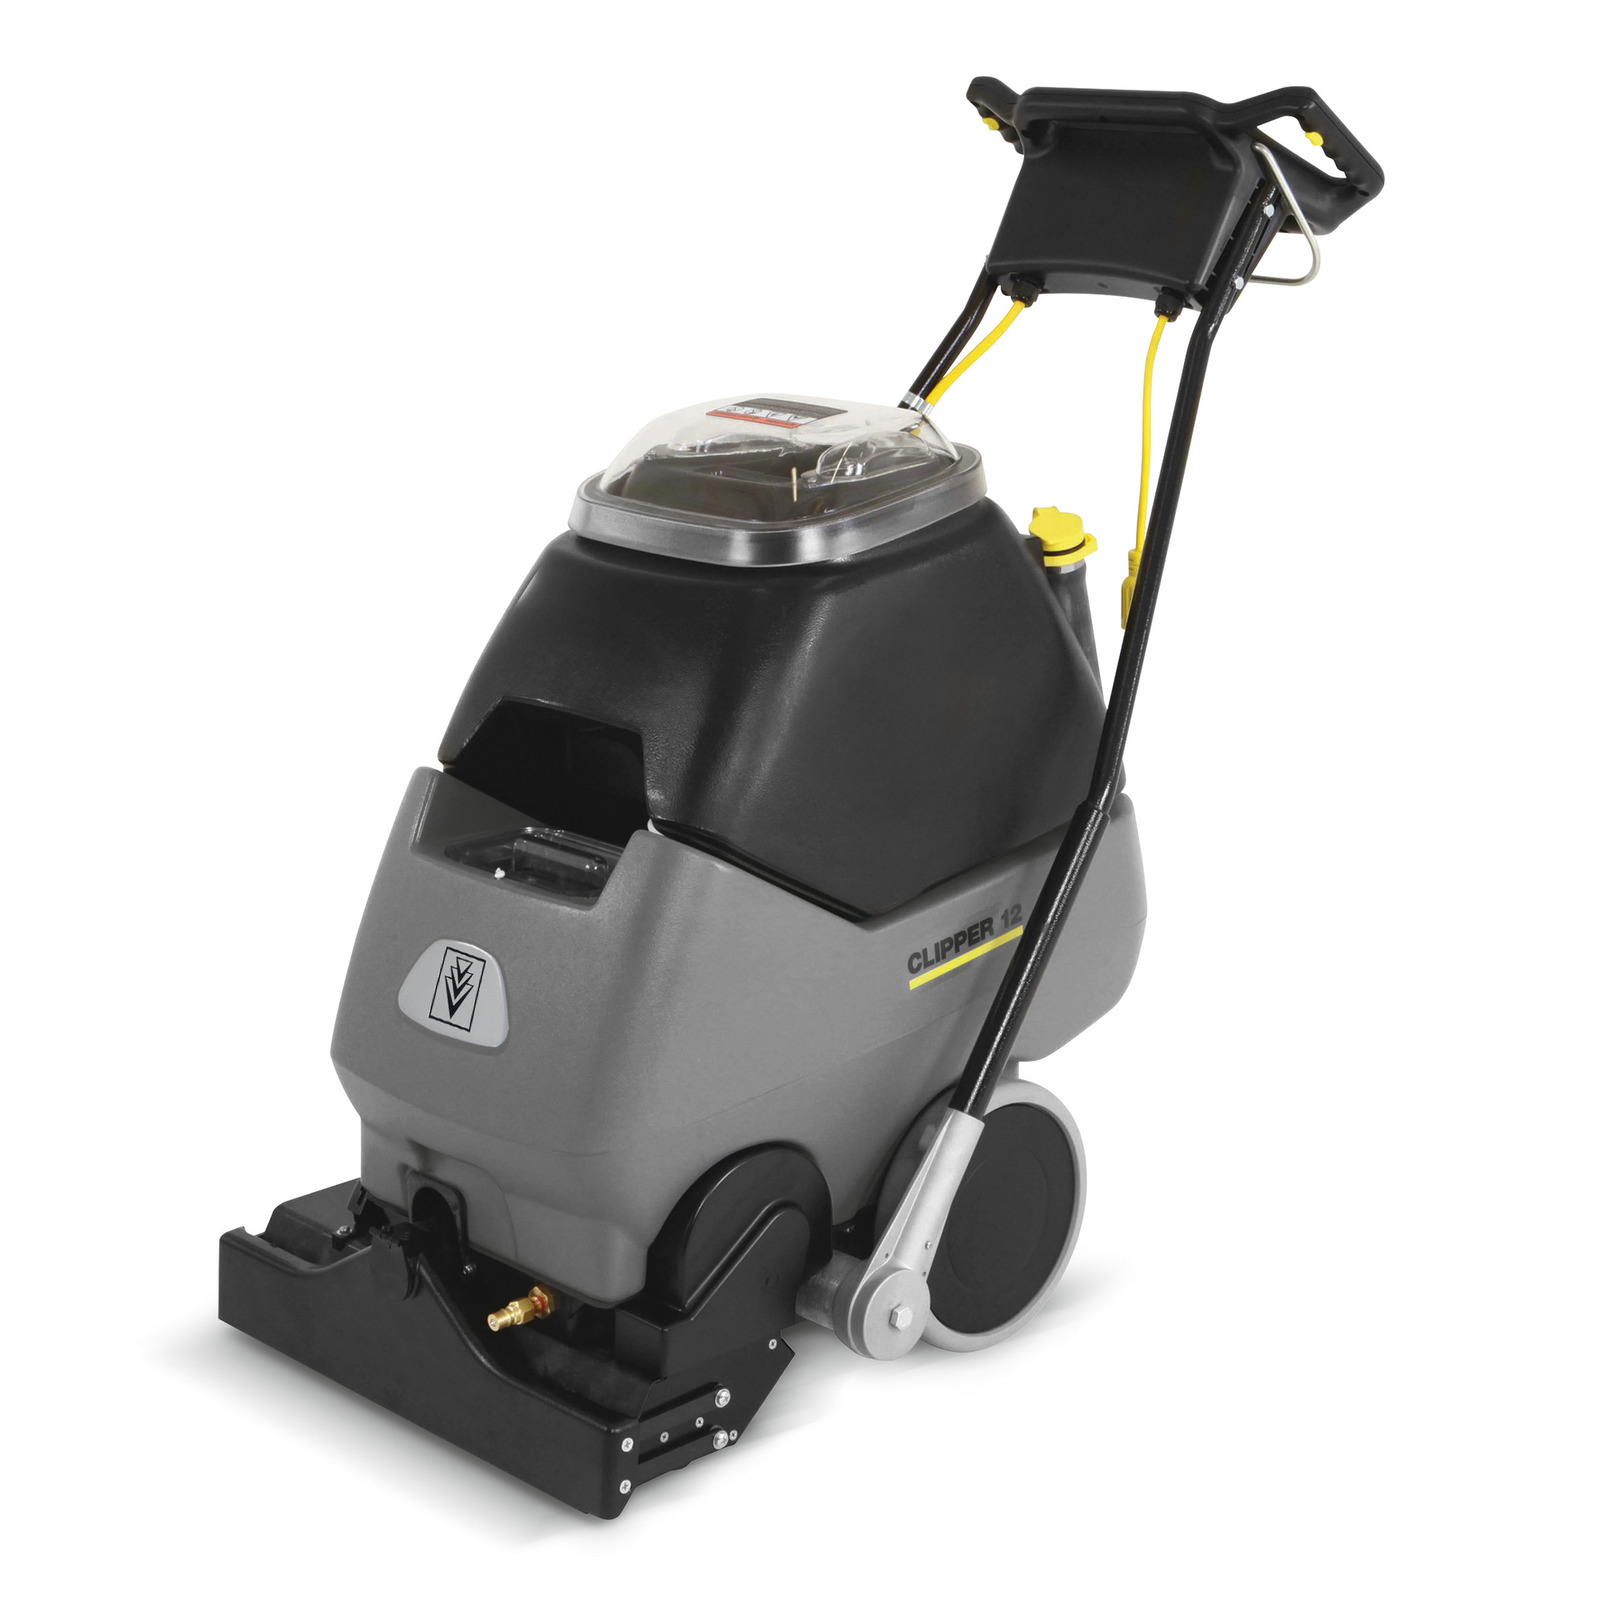  Kärcher Commercial Carpet Extractor - Puzzi 10/0 - Great for  Spot Cleaning, Carpet and Upholstery Cleaning - 4.9 Gallon : Everything Else